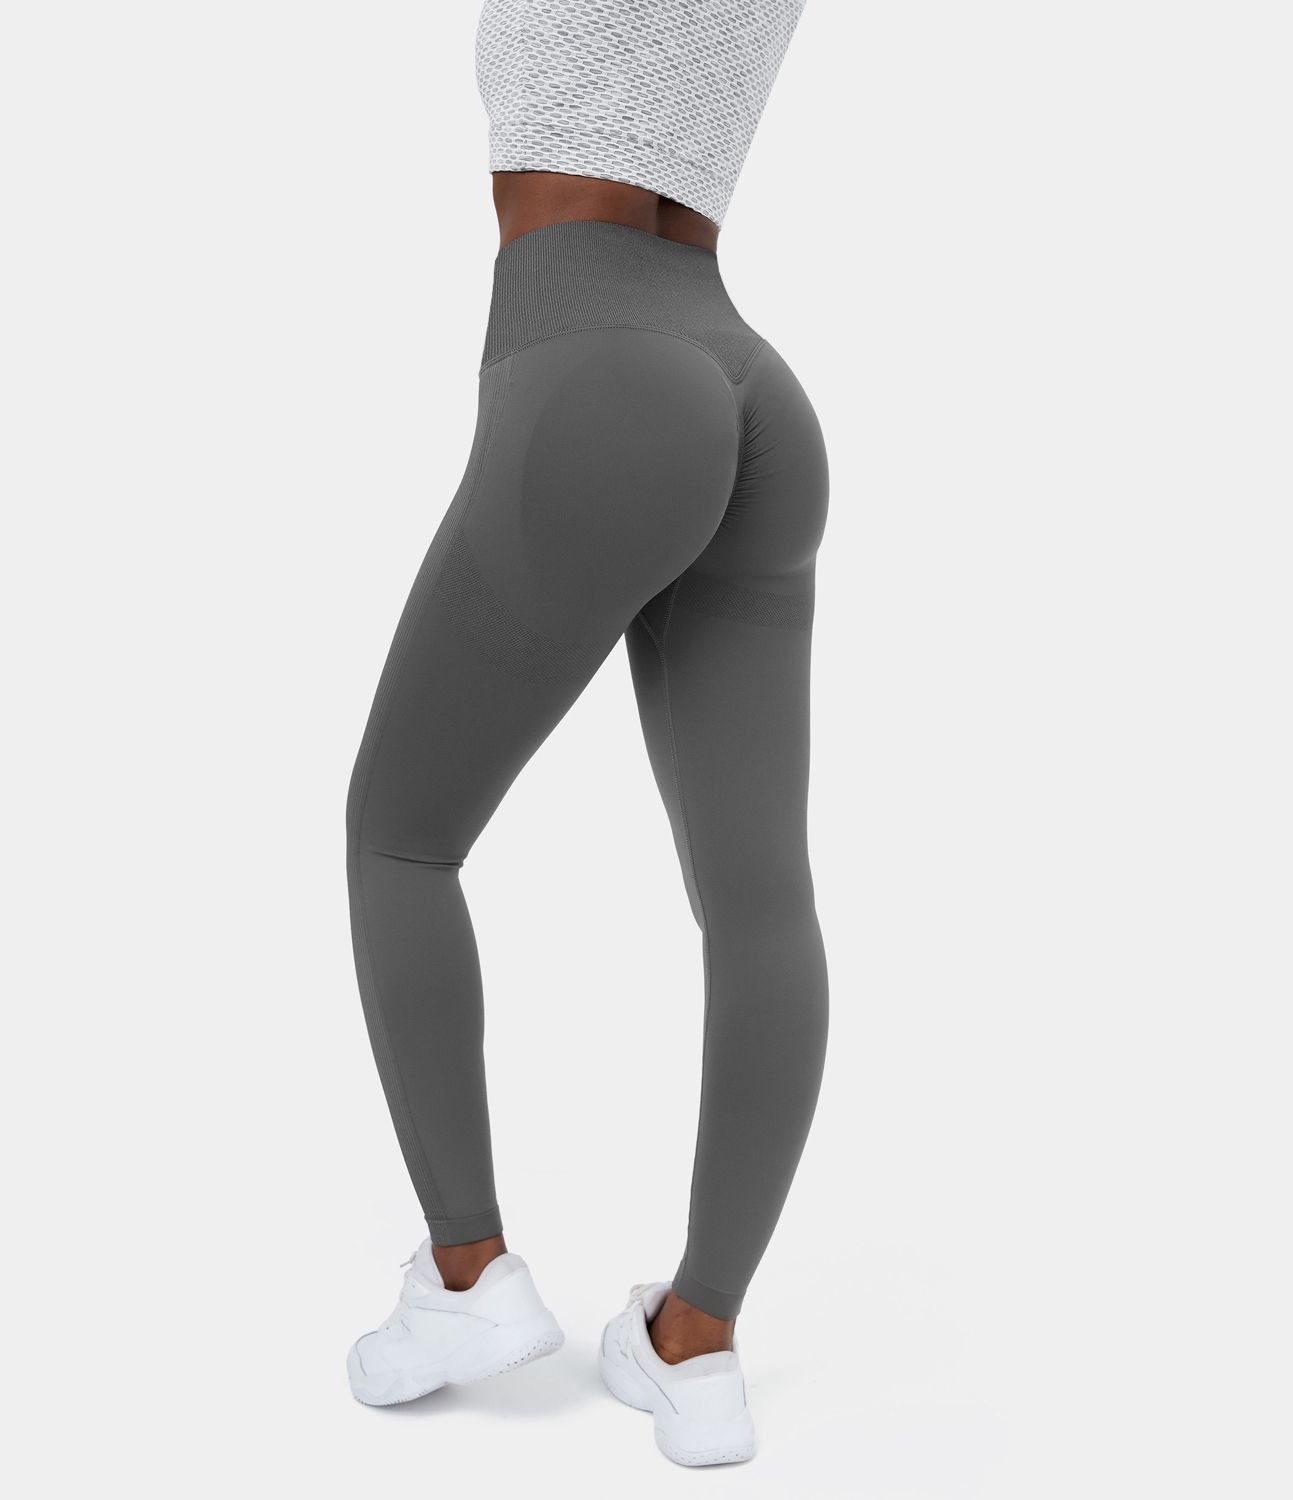 Amazon.com: Iuulfex Scrunch Butt Lifting Leggings Seamless Women Booty Yoga  Pants Anti Cellulite Textured Leggings Workout High Waisted : Sports &  Outdoors